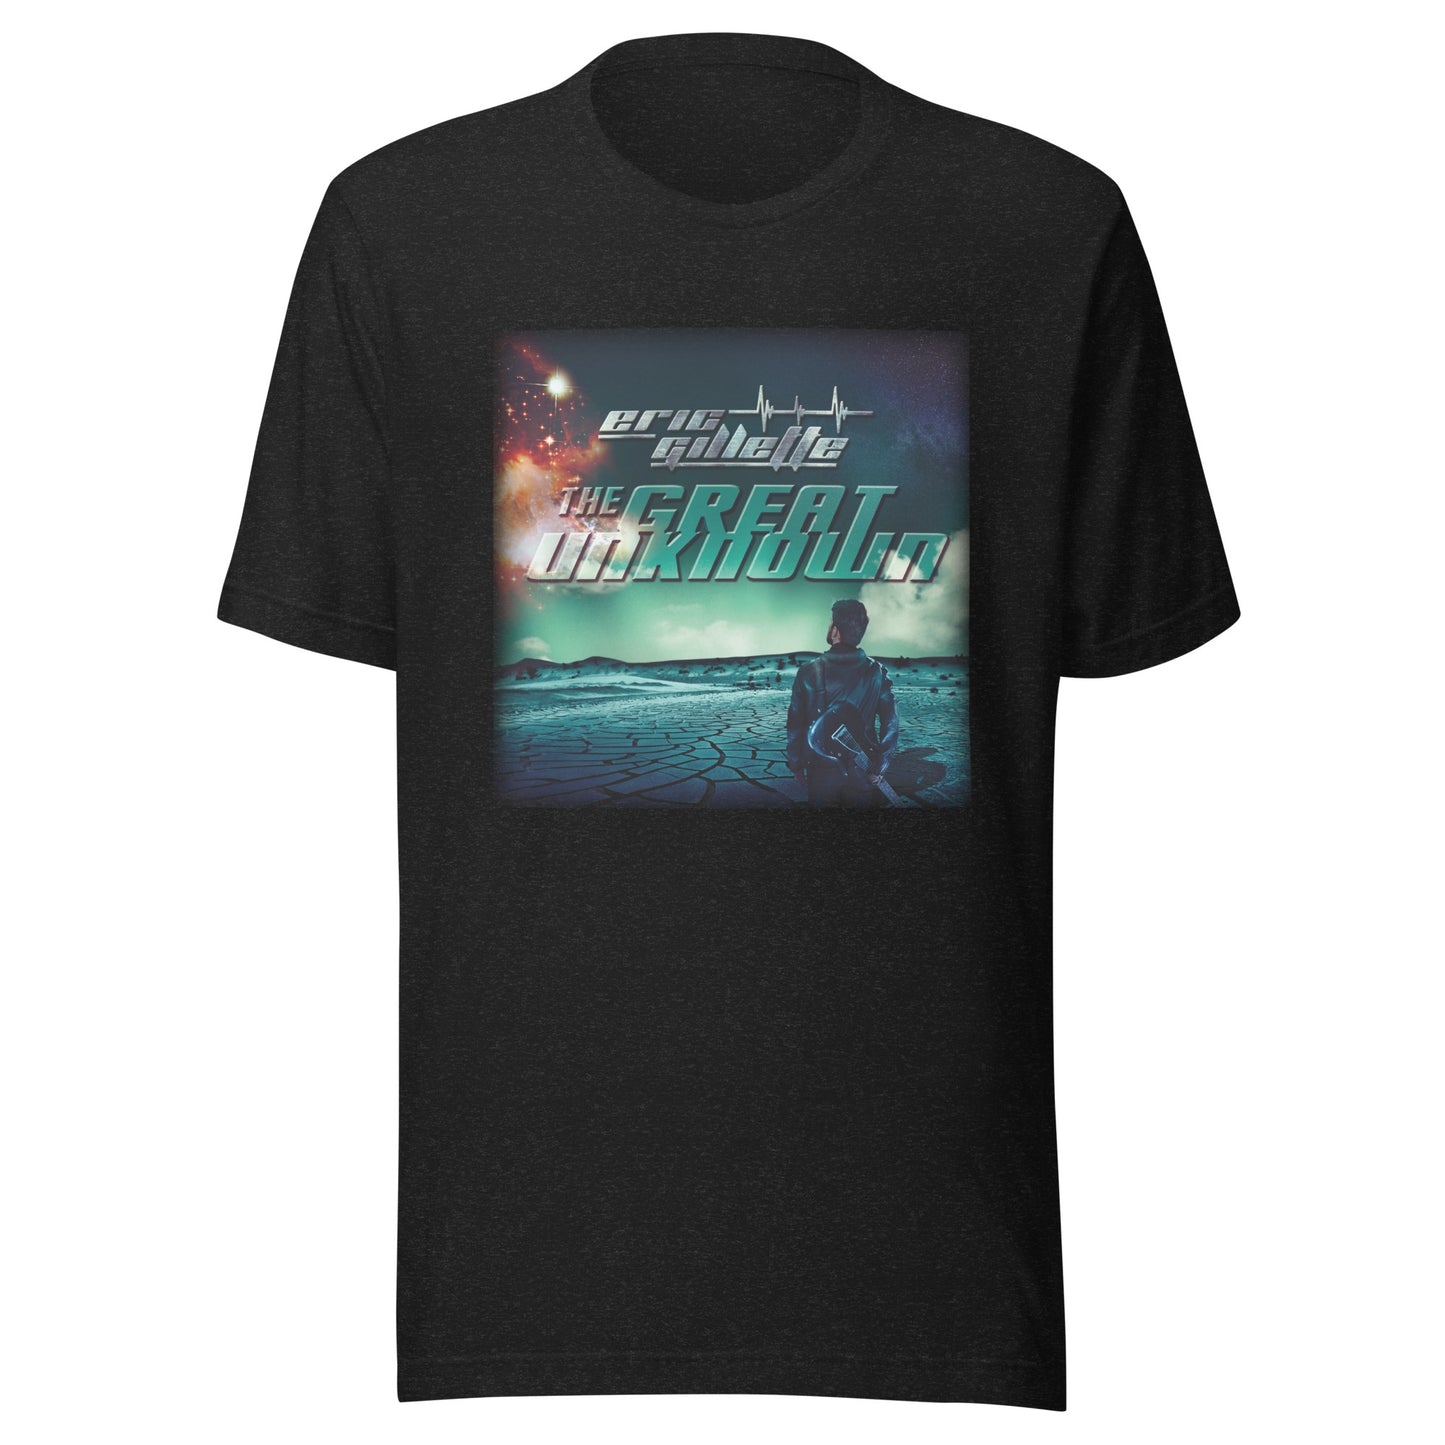 The Great Unknown Album Cover Unisex T-shirt